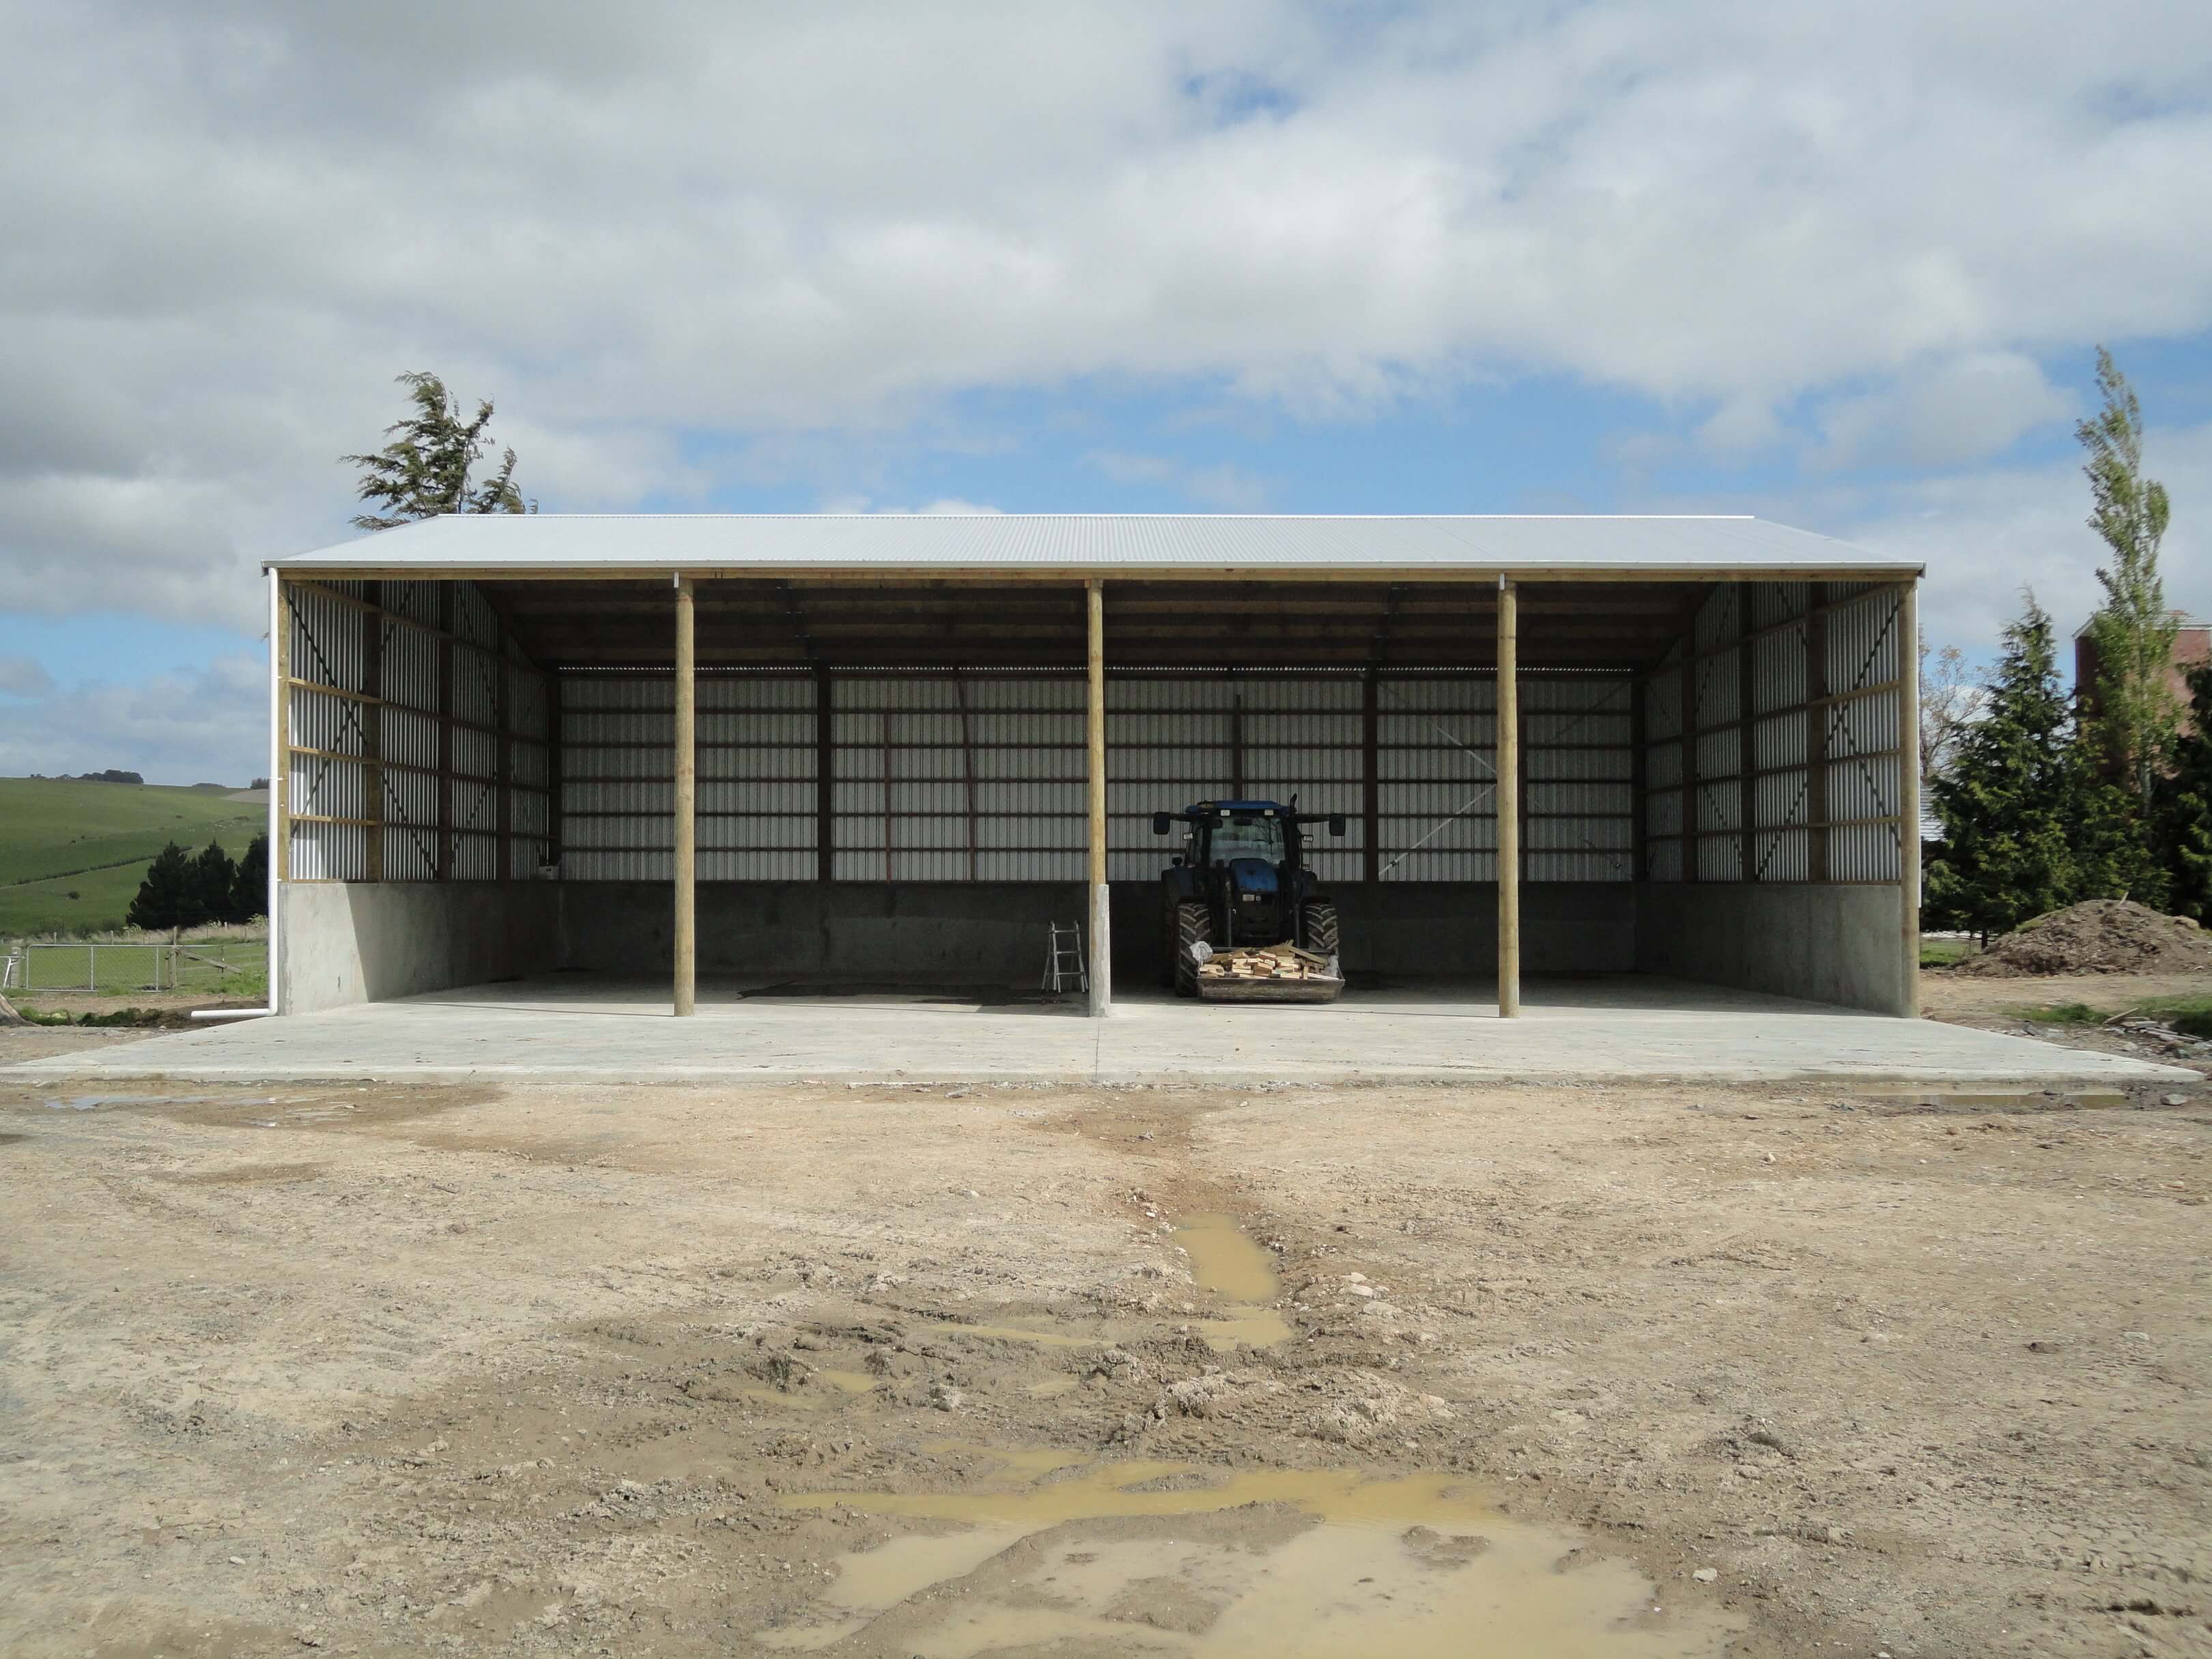 This bulk storage shed has 4 open bays for easy access